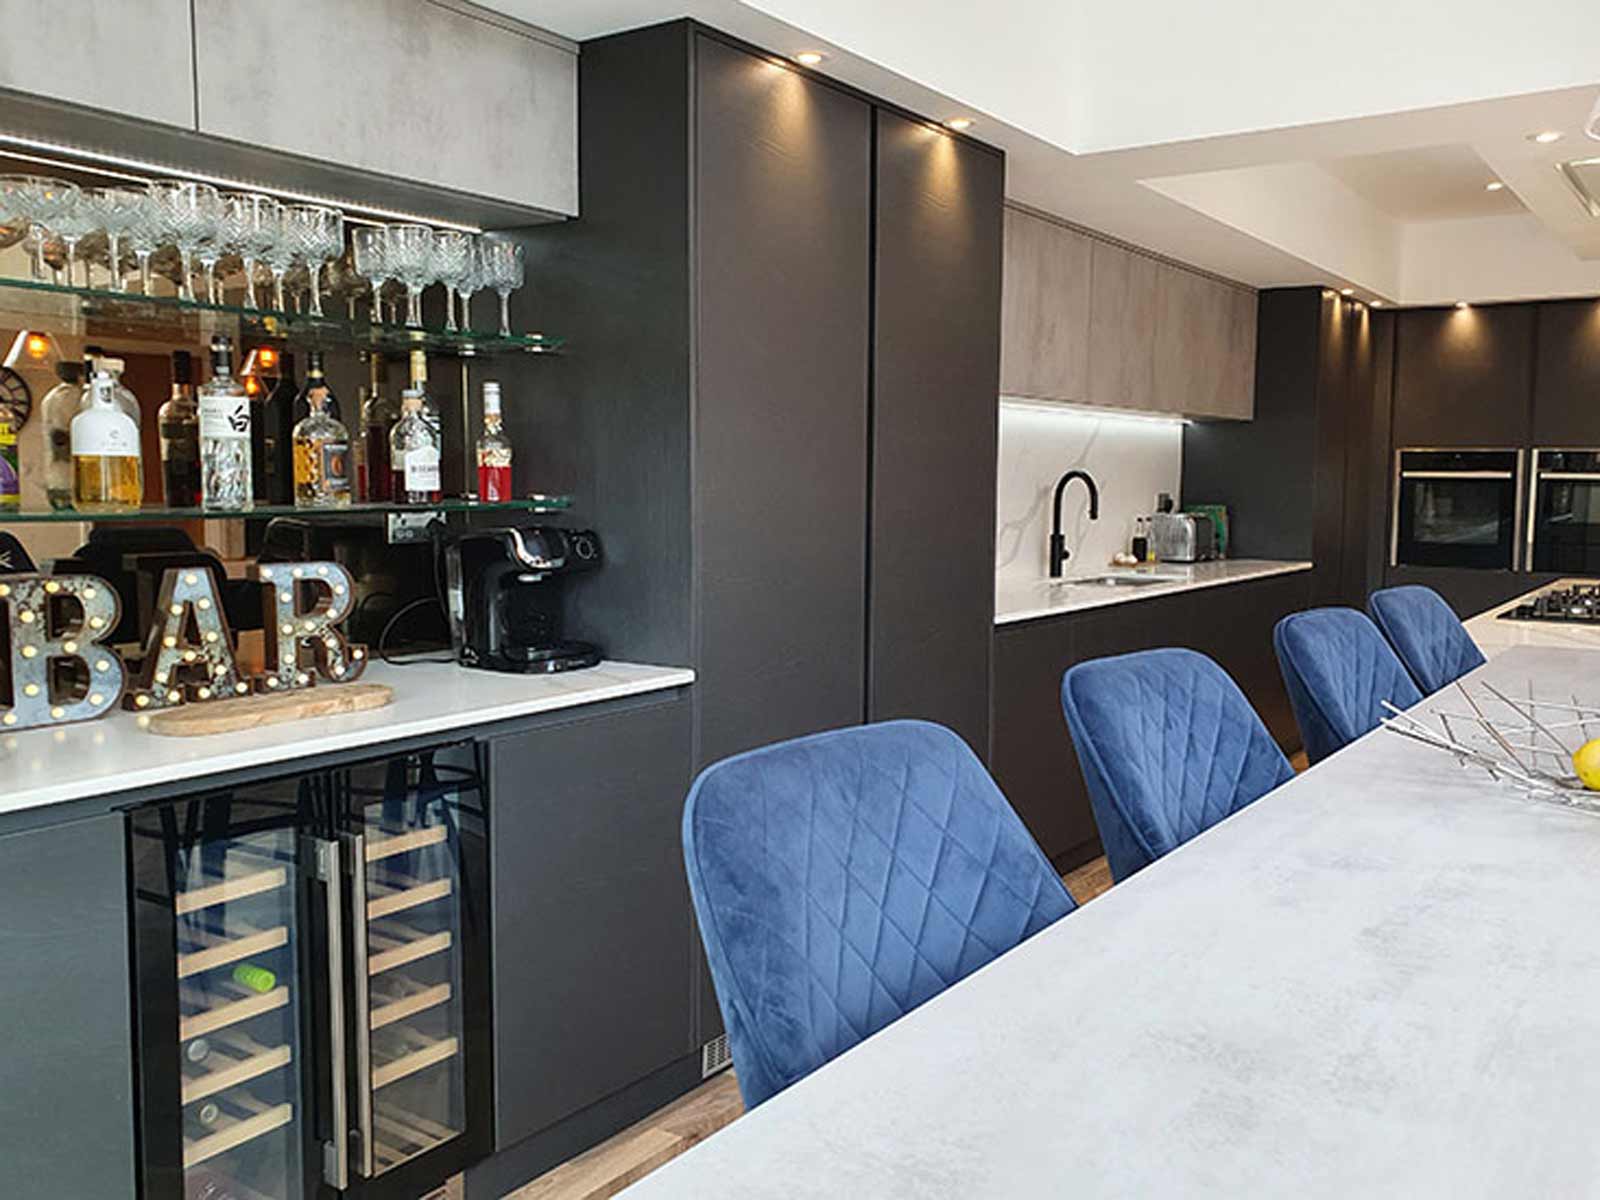 A luxury kitchen designed for one of the coolest houses Cardiff has to offer